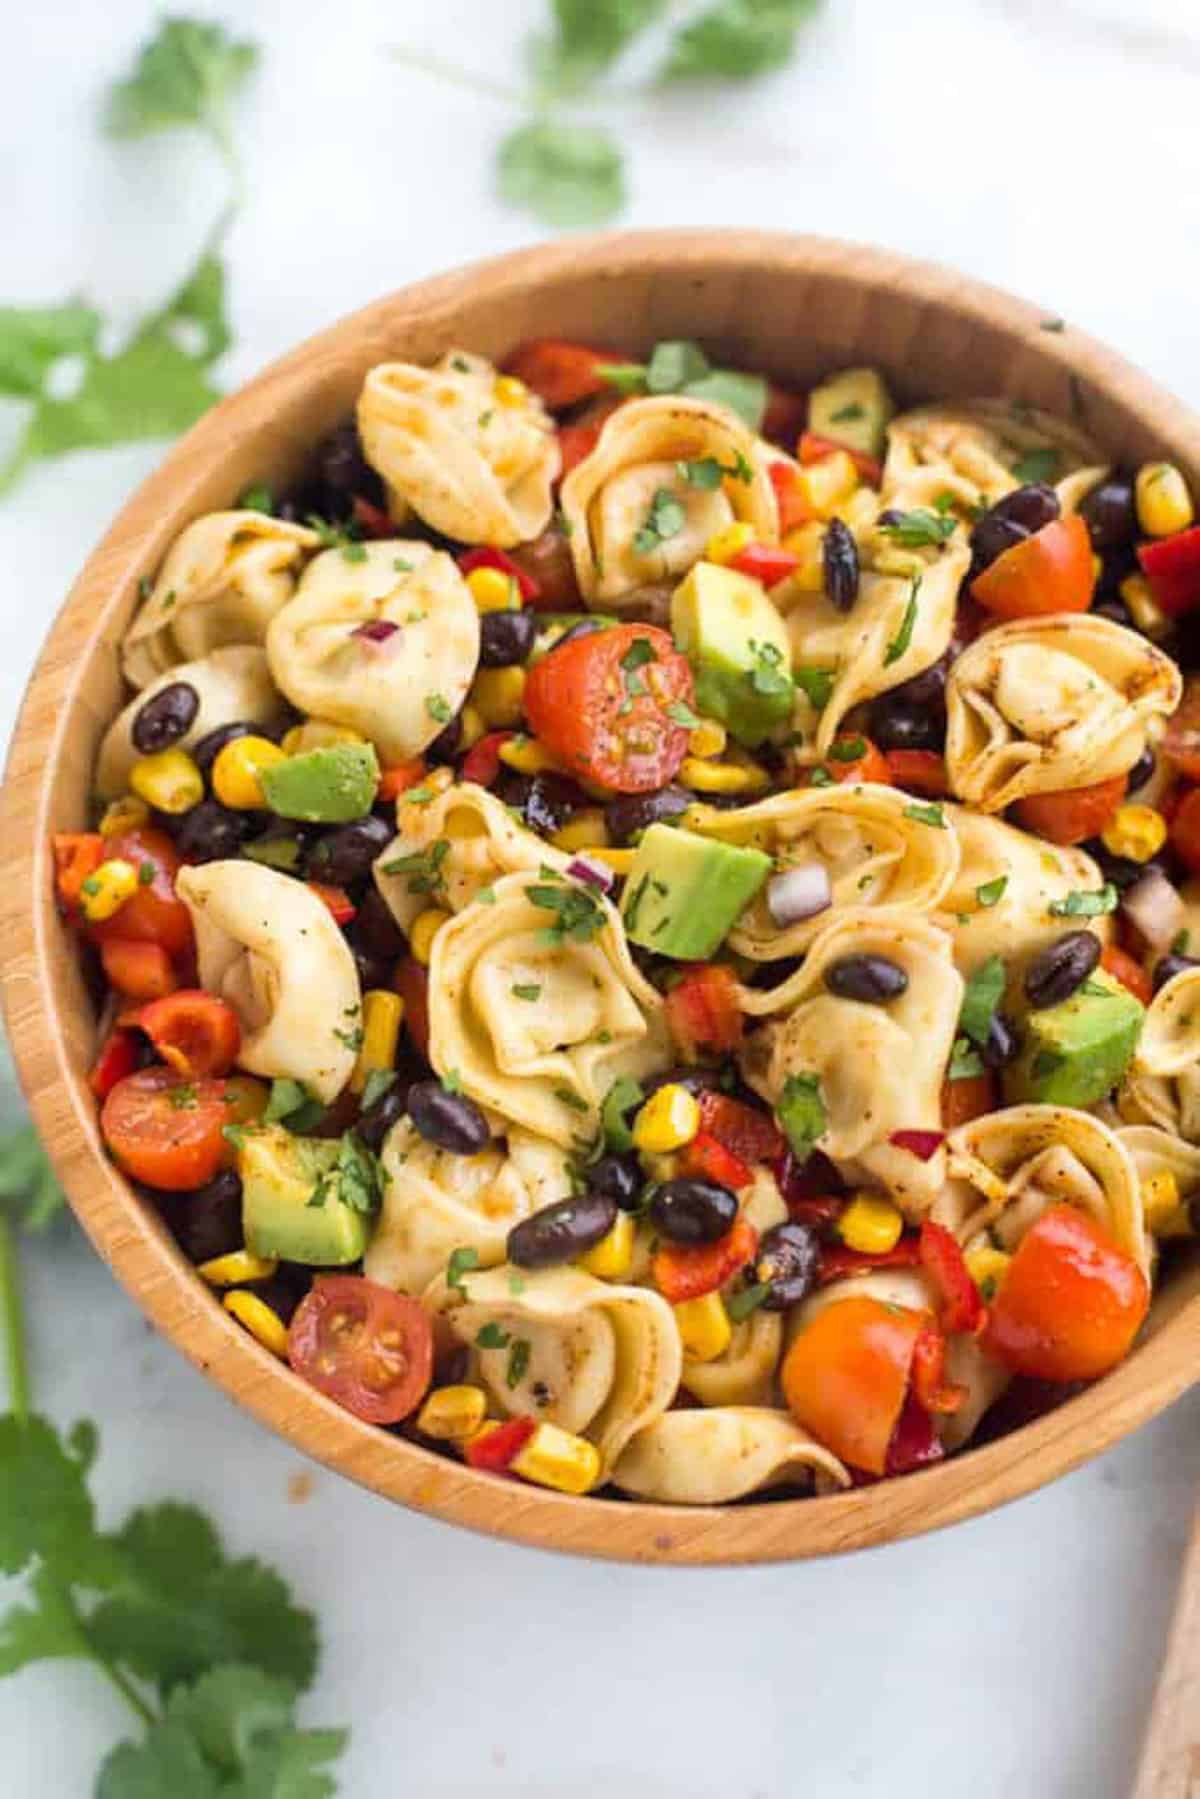 A Tortellini Pasta Salad with tomatoes, corn, black beans, and avocado in a wooden bowl.